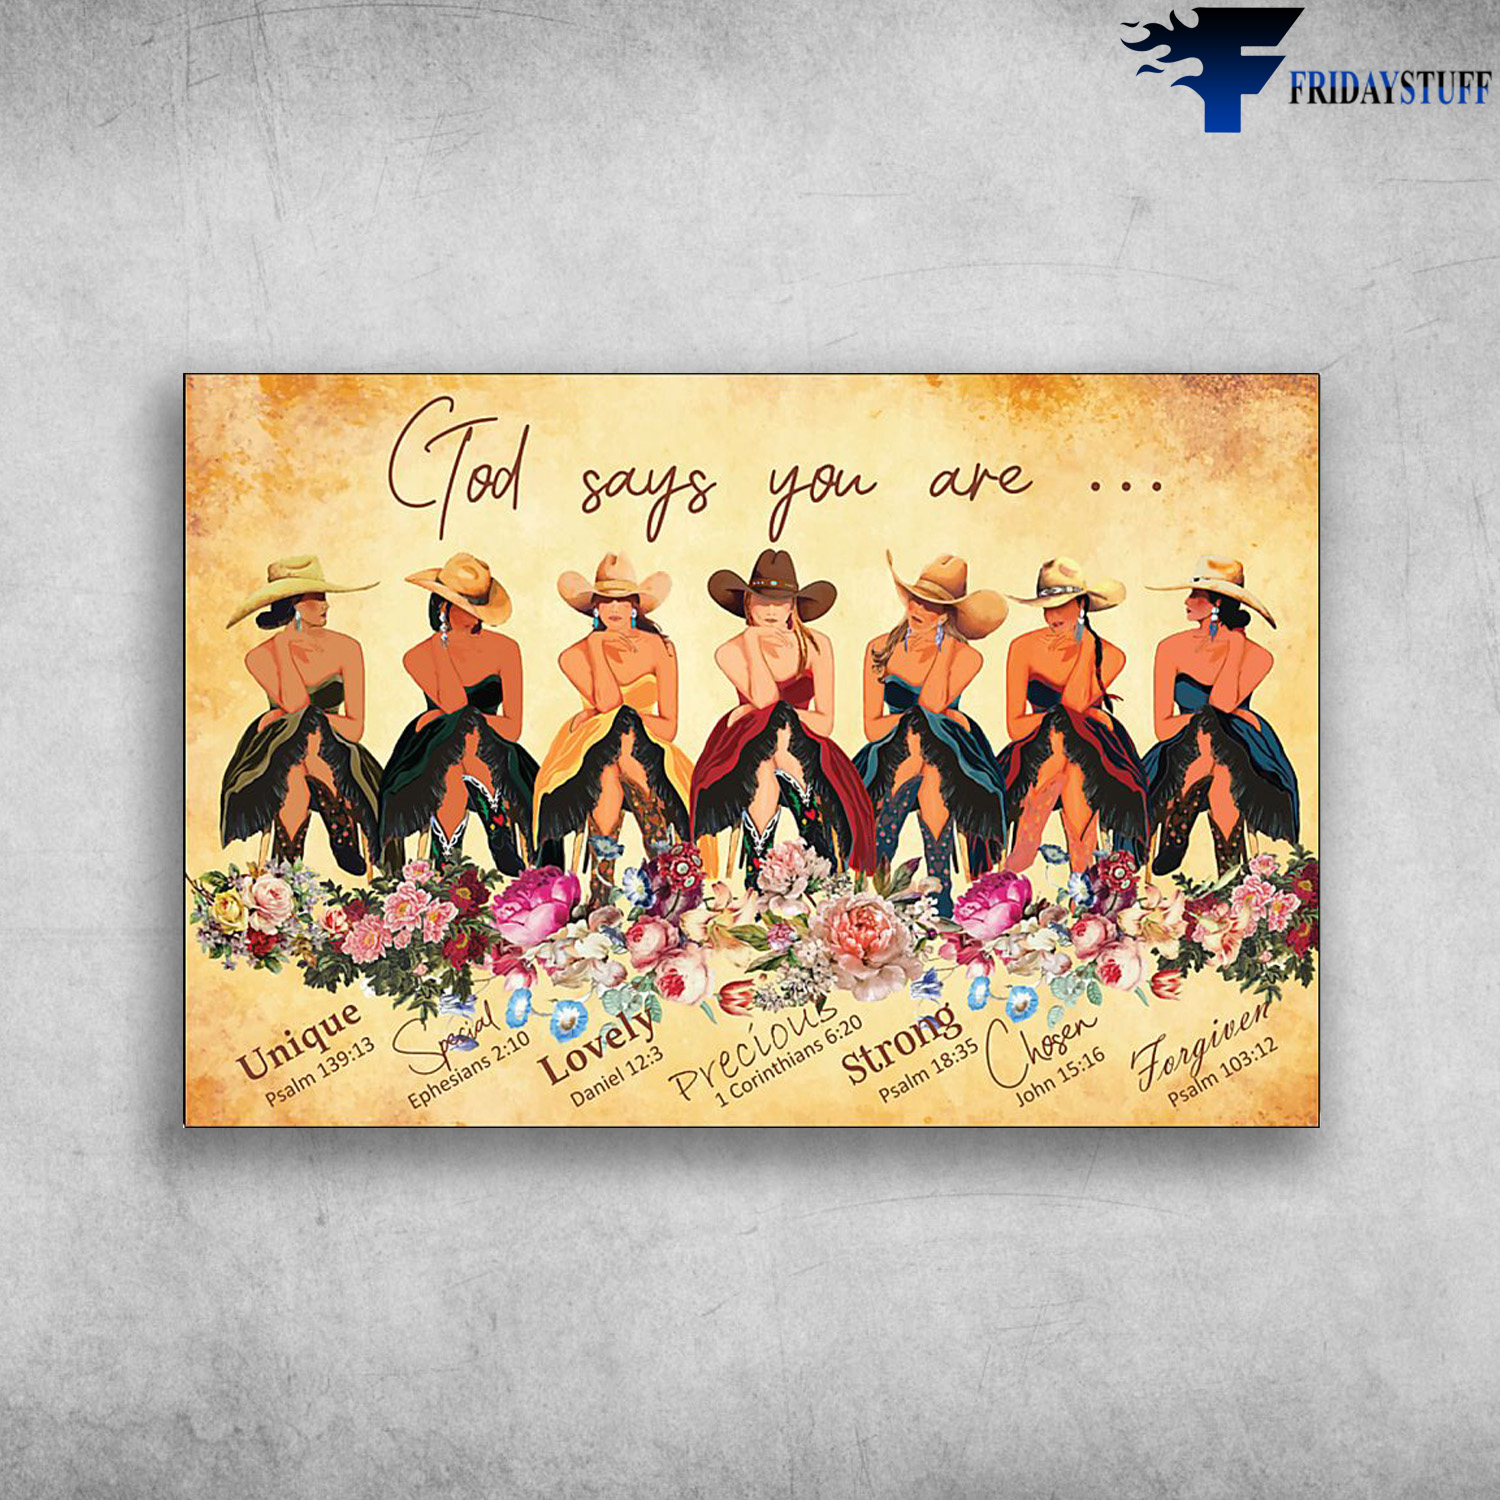 The Lady, Cowgirl - God Say You Are Unique, Special, Lovely, Precious, Strong, Chosen, Forgiven